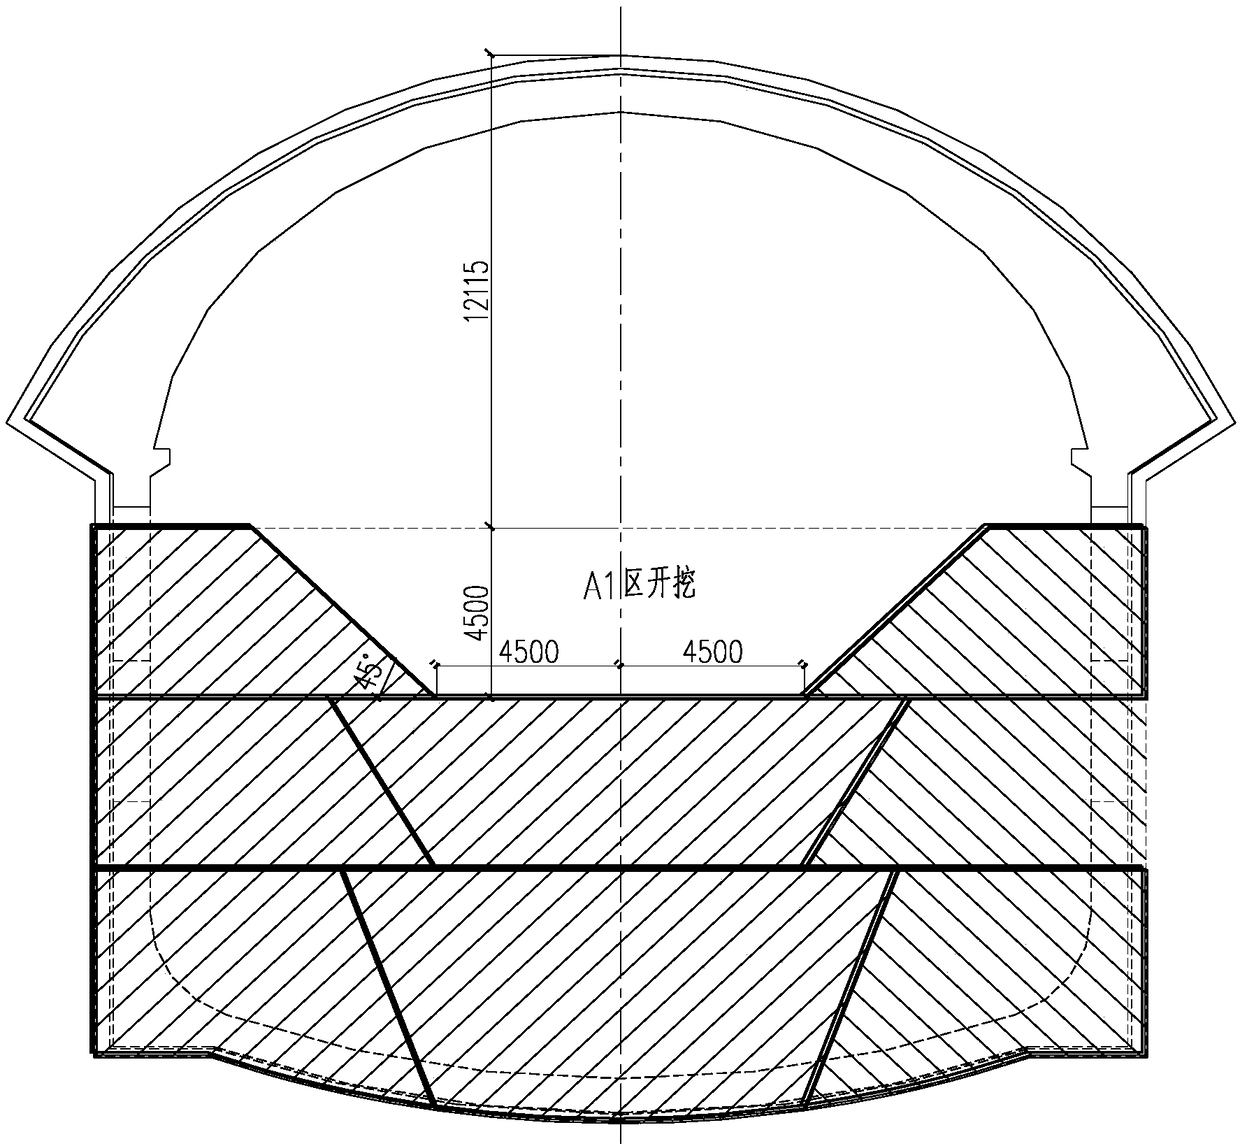 Rapid construction method for excavation of lower portion of ultra-large cross-section metro station through large arch cover method